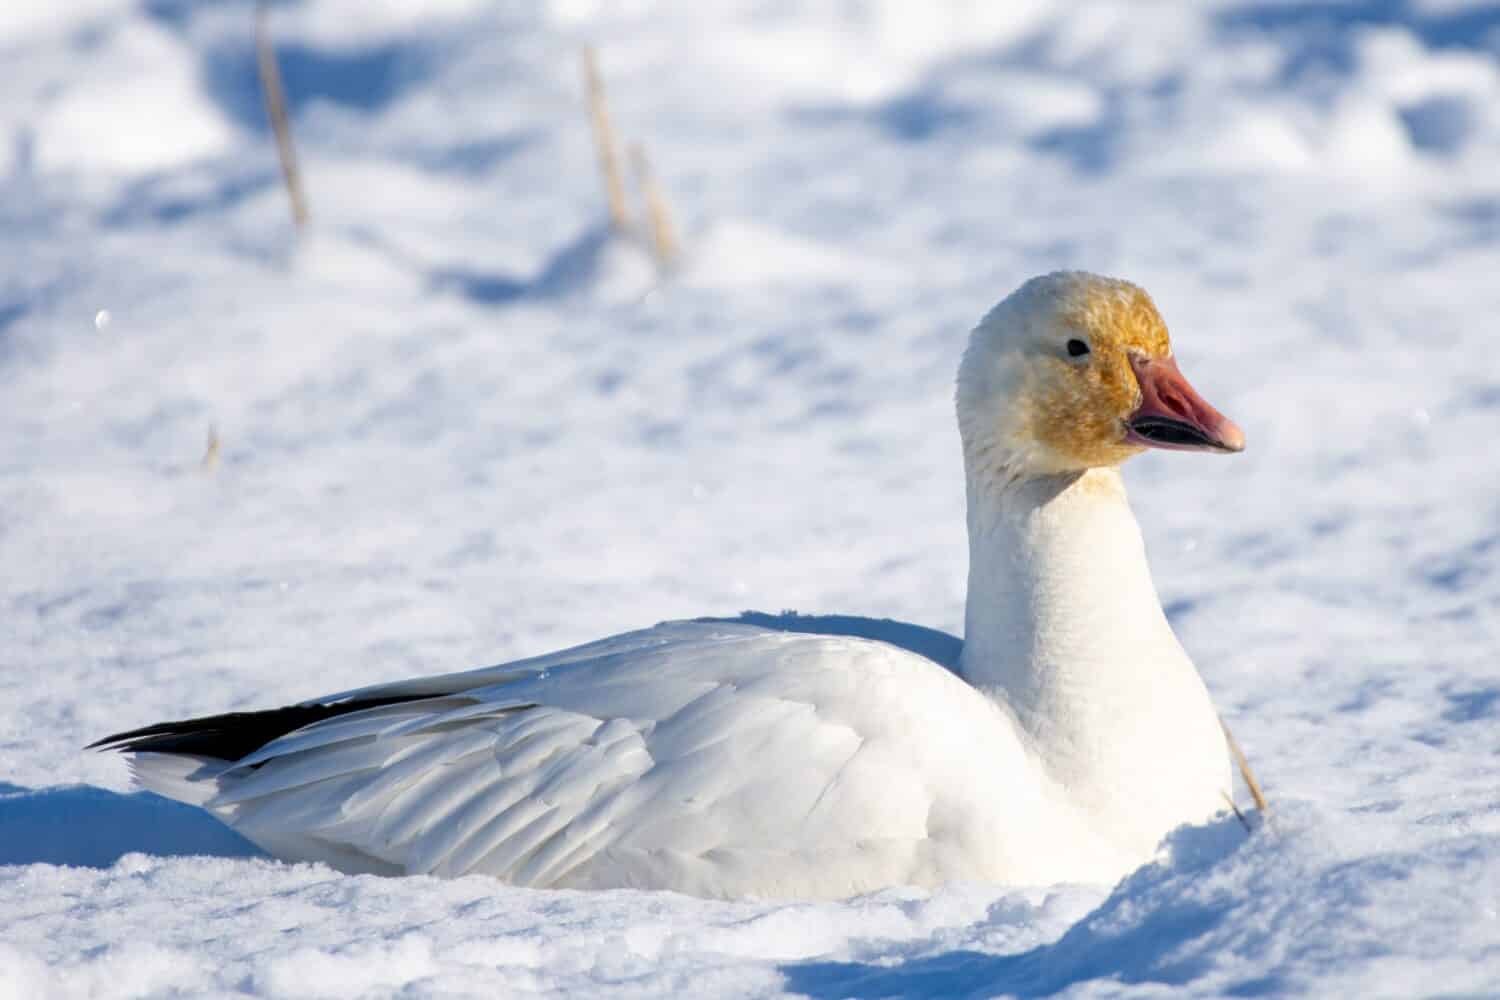 Snow goose (Anser caerulescens) resting in the snow in the sunshine